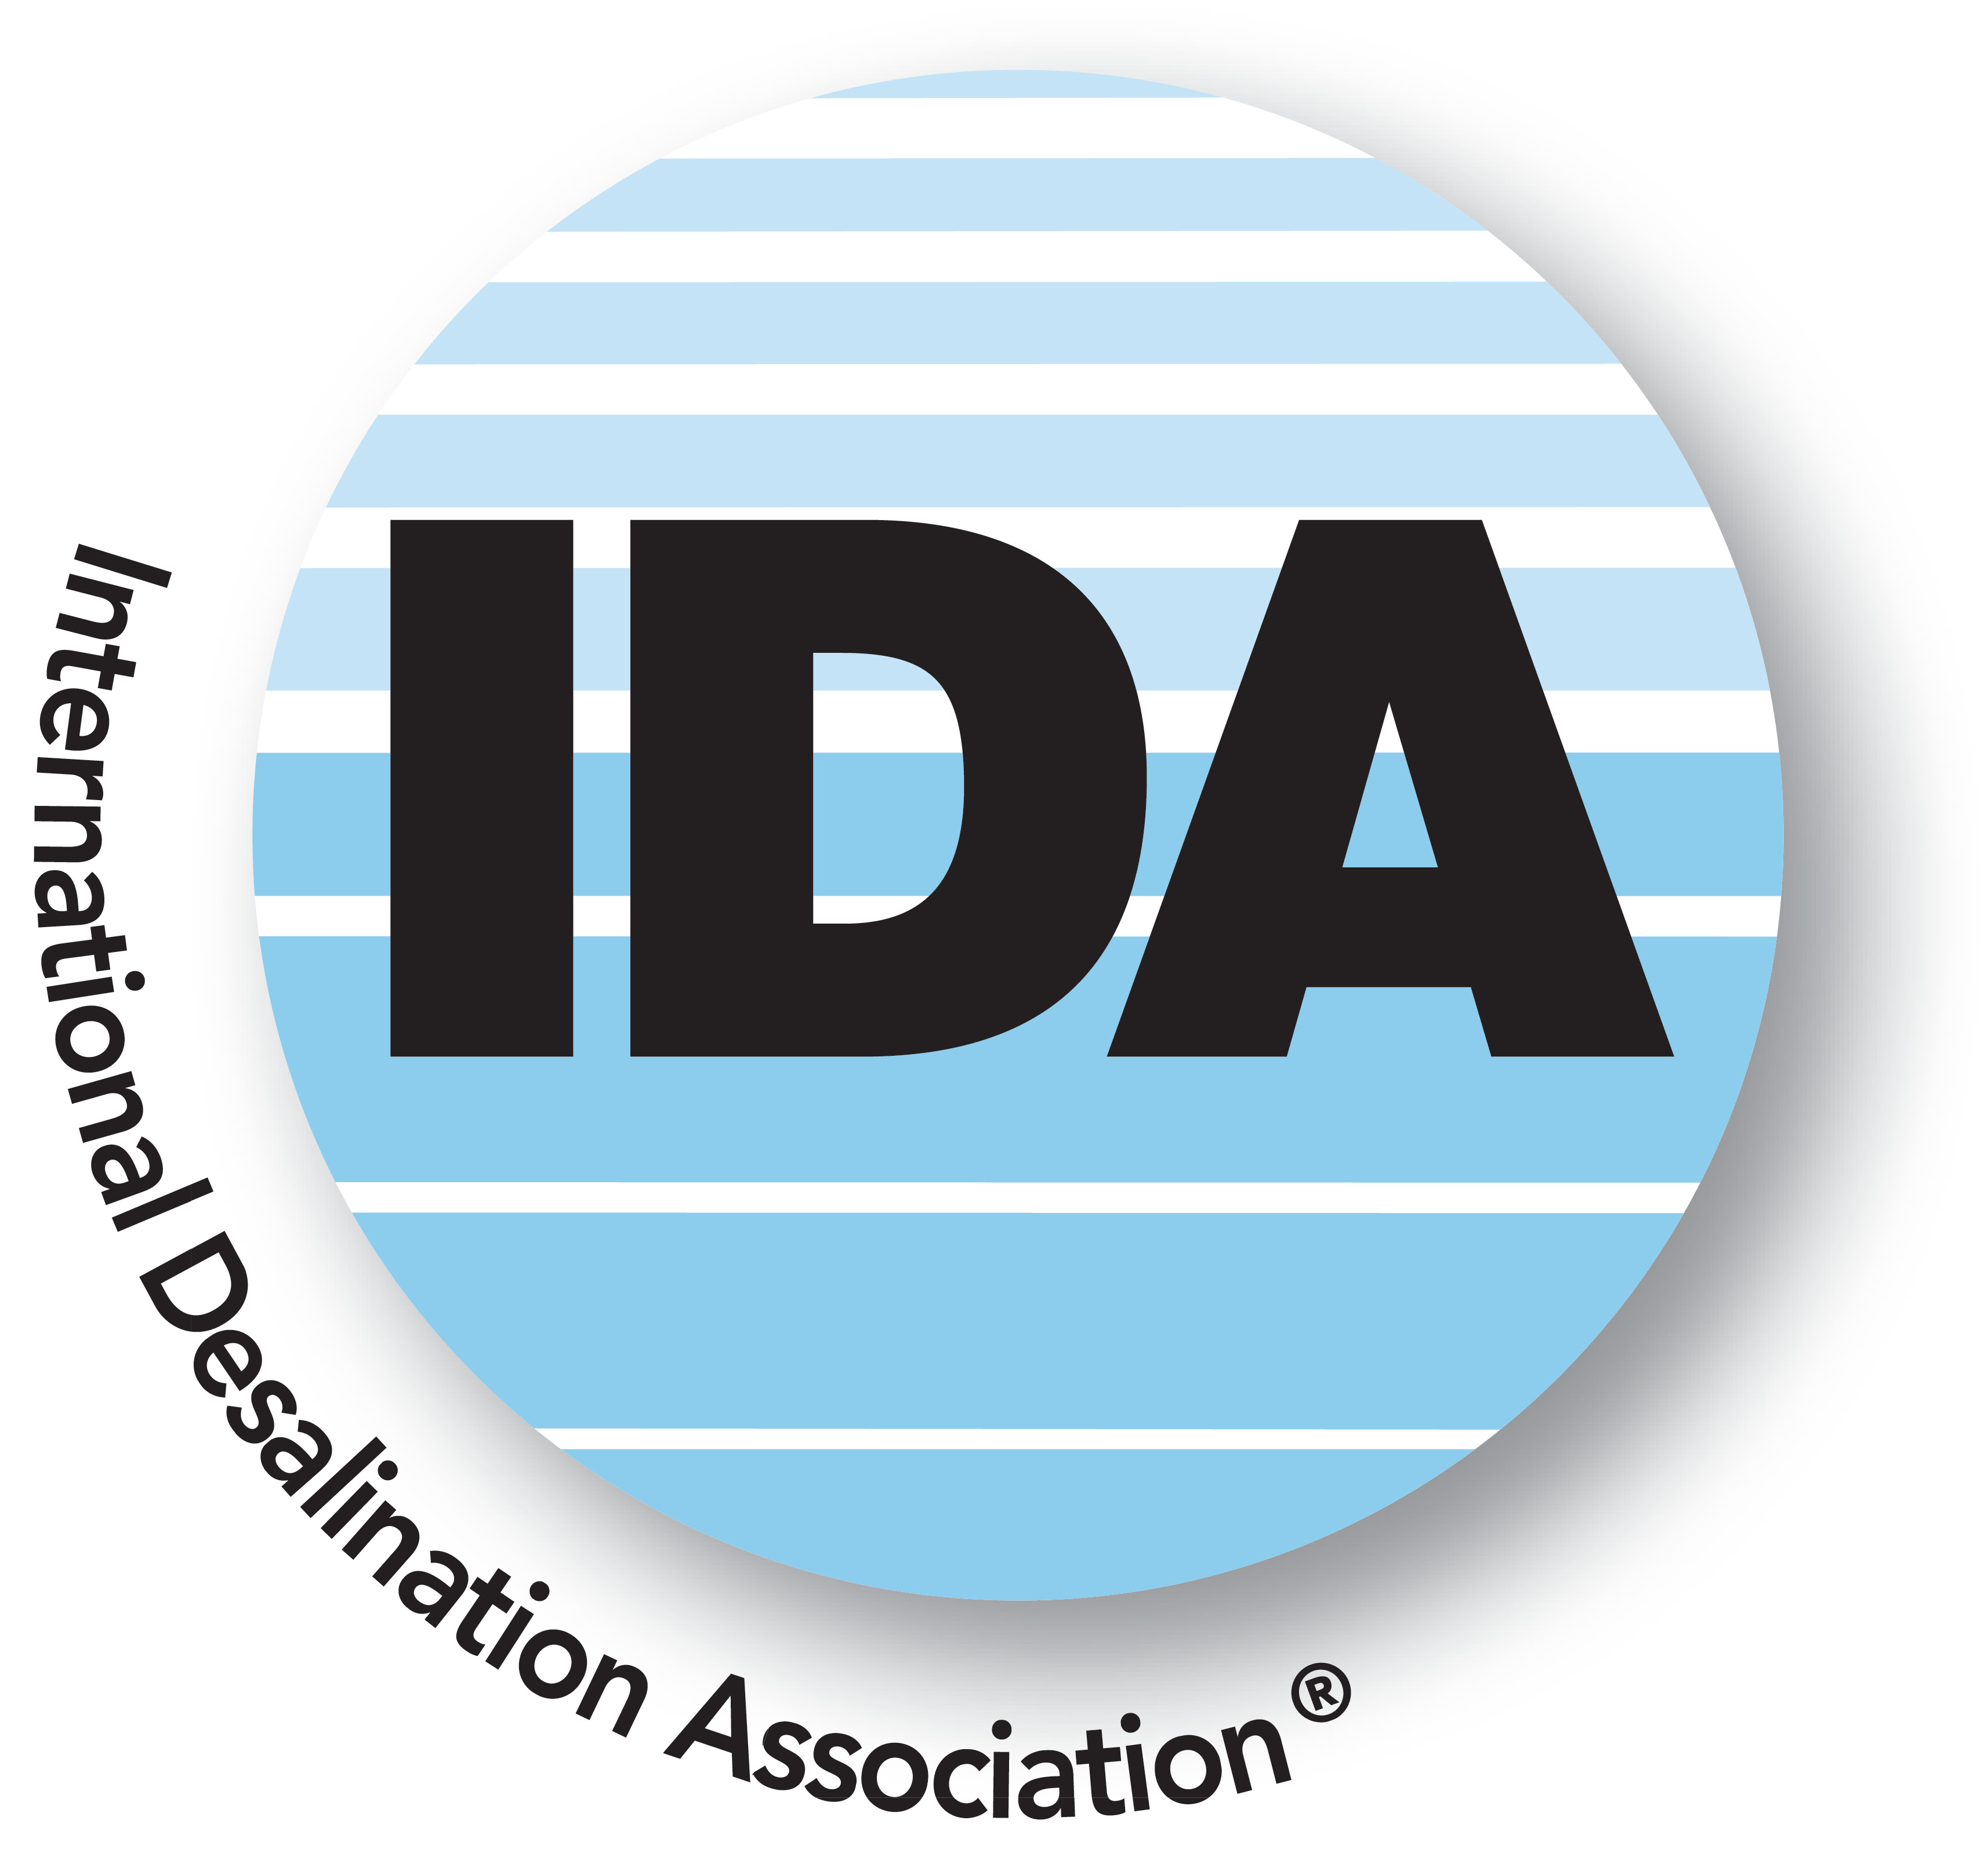 The IDA is introducing two key new aspects of the Congress programme - the IDA Affiliate Majlis Forums and the IDA Leaders’ Summit.